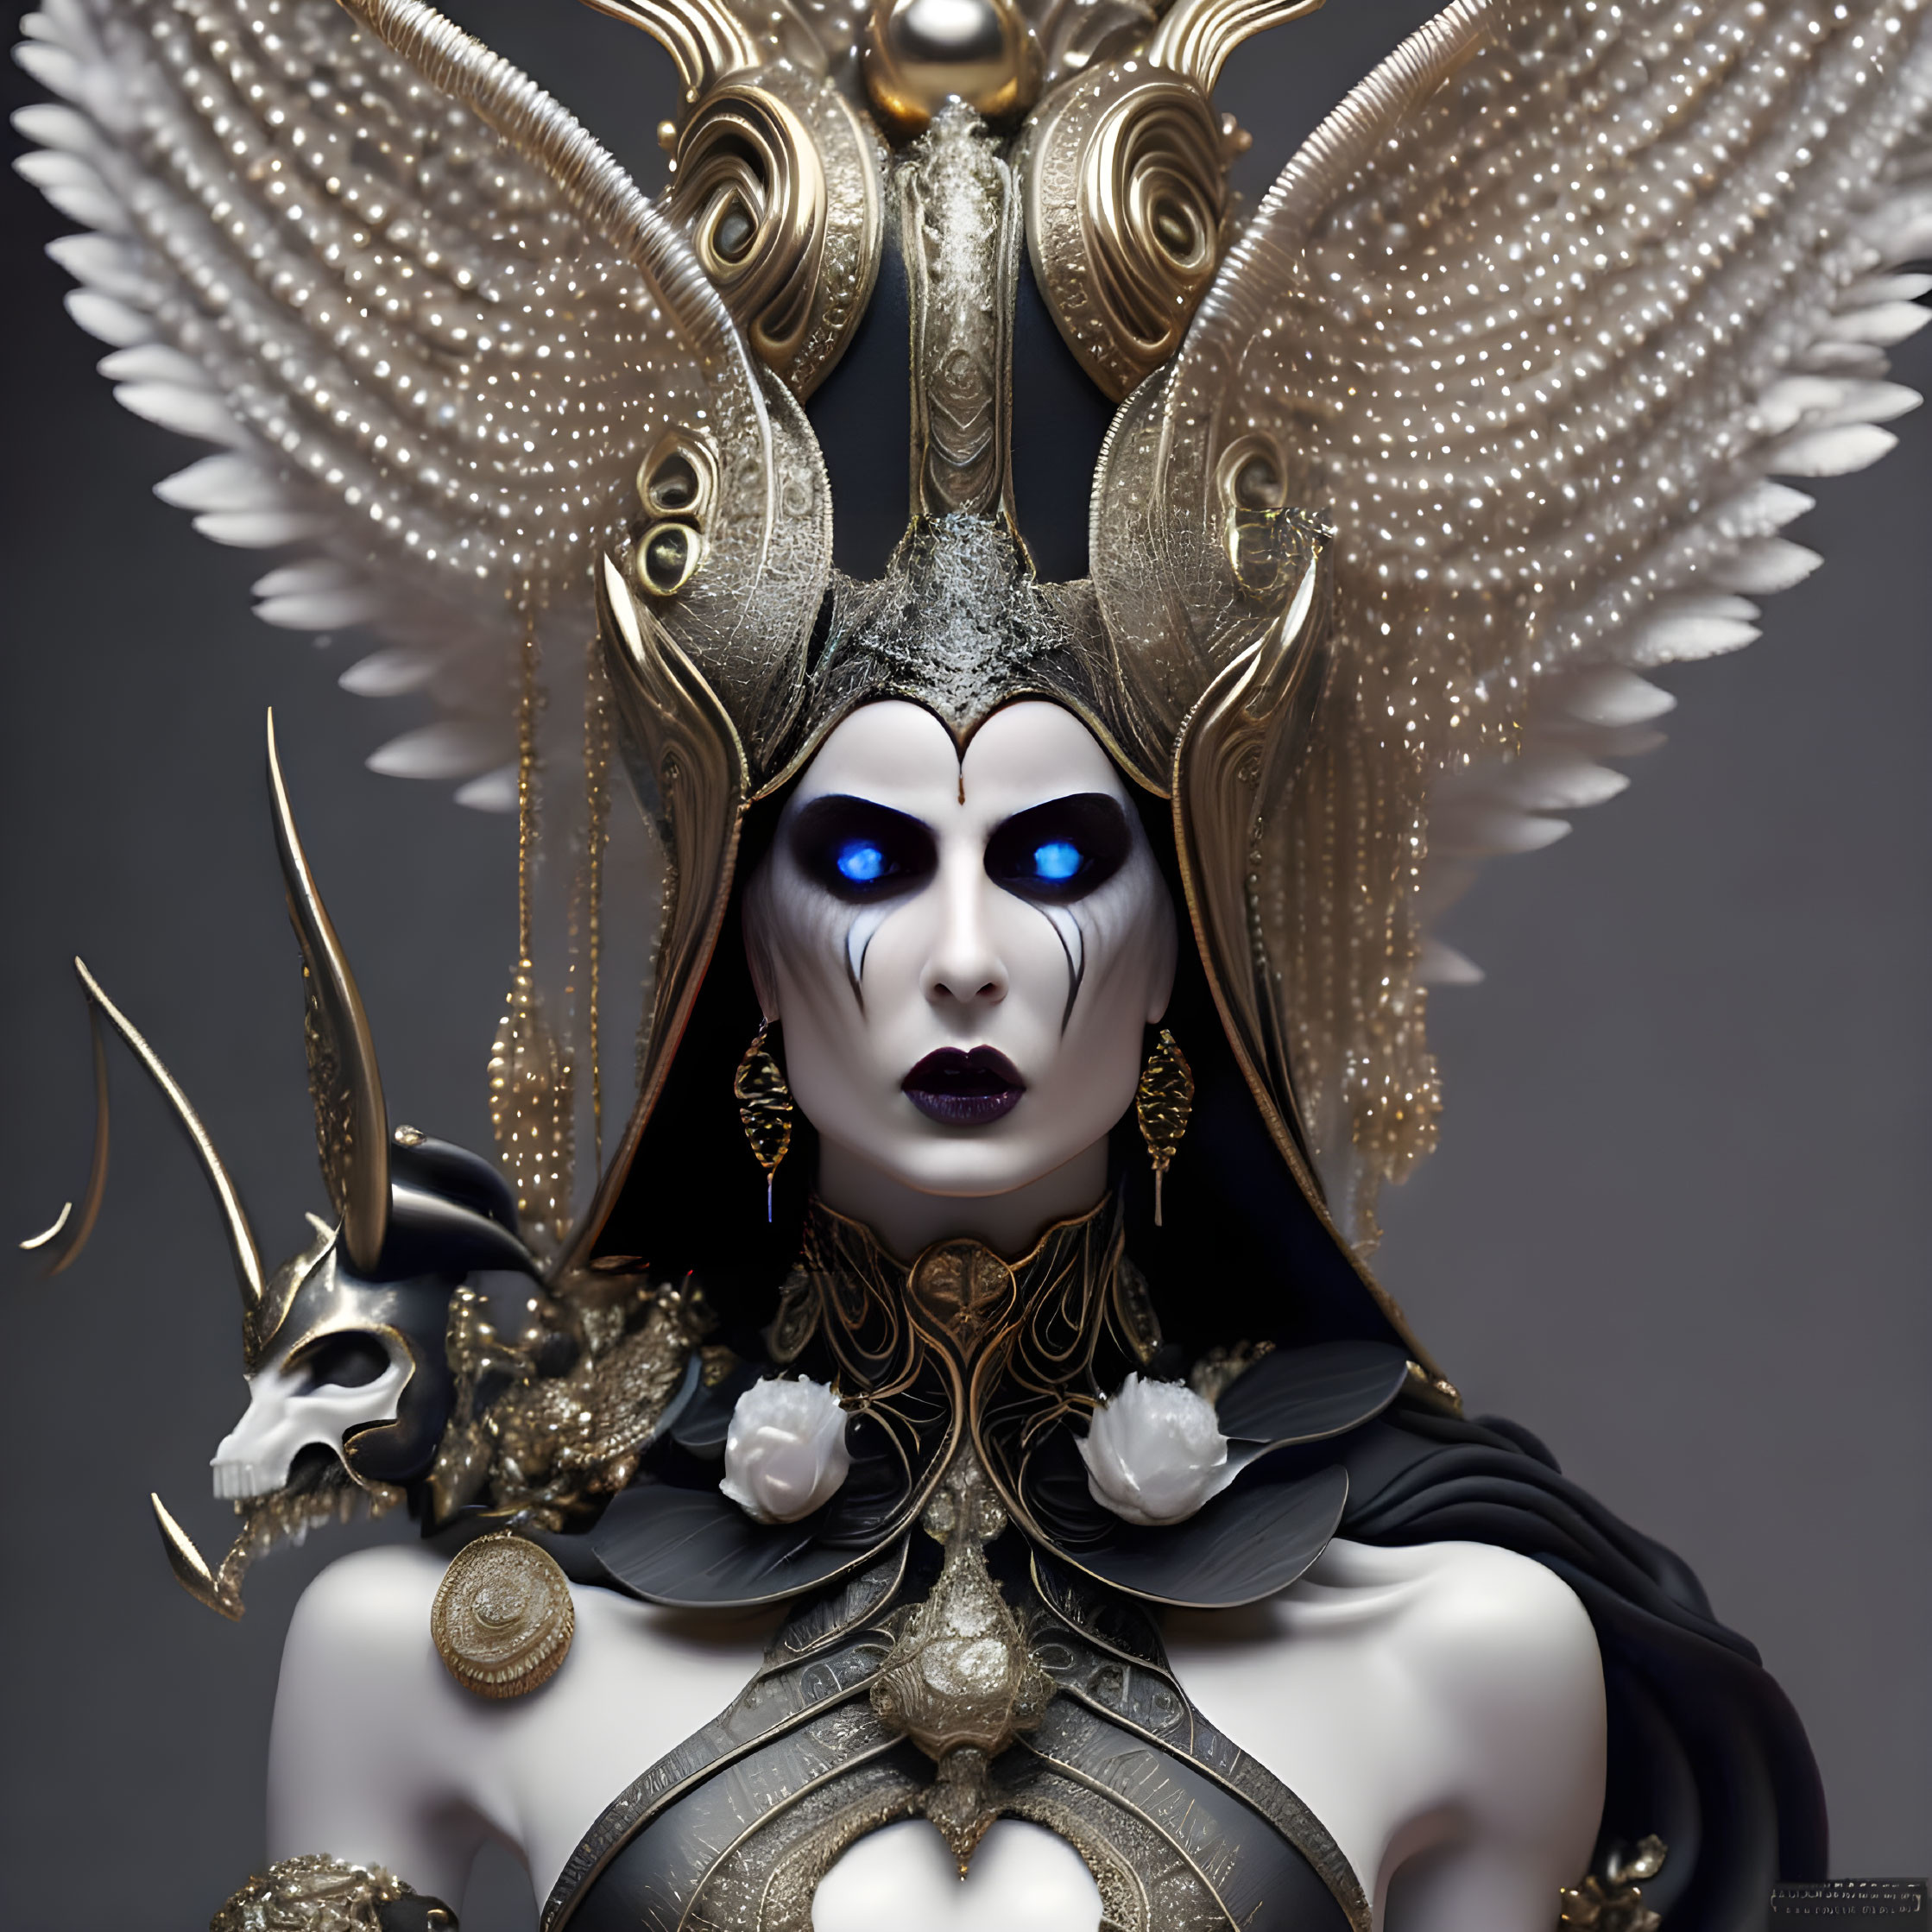 Fantasy character with gold and white headdress, glowing blue eyes, dark makeup, and skull on